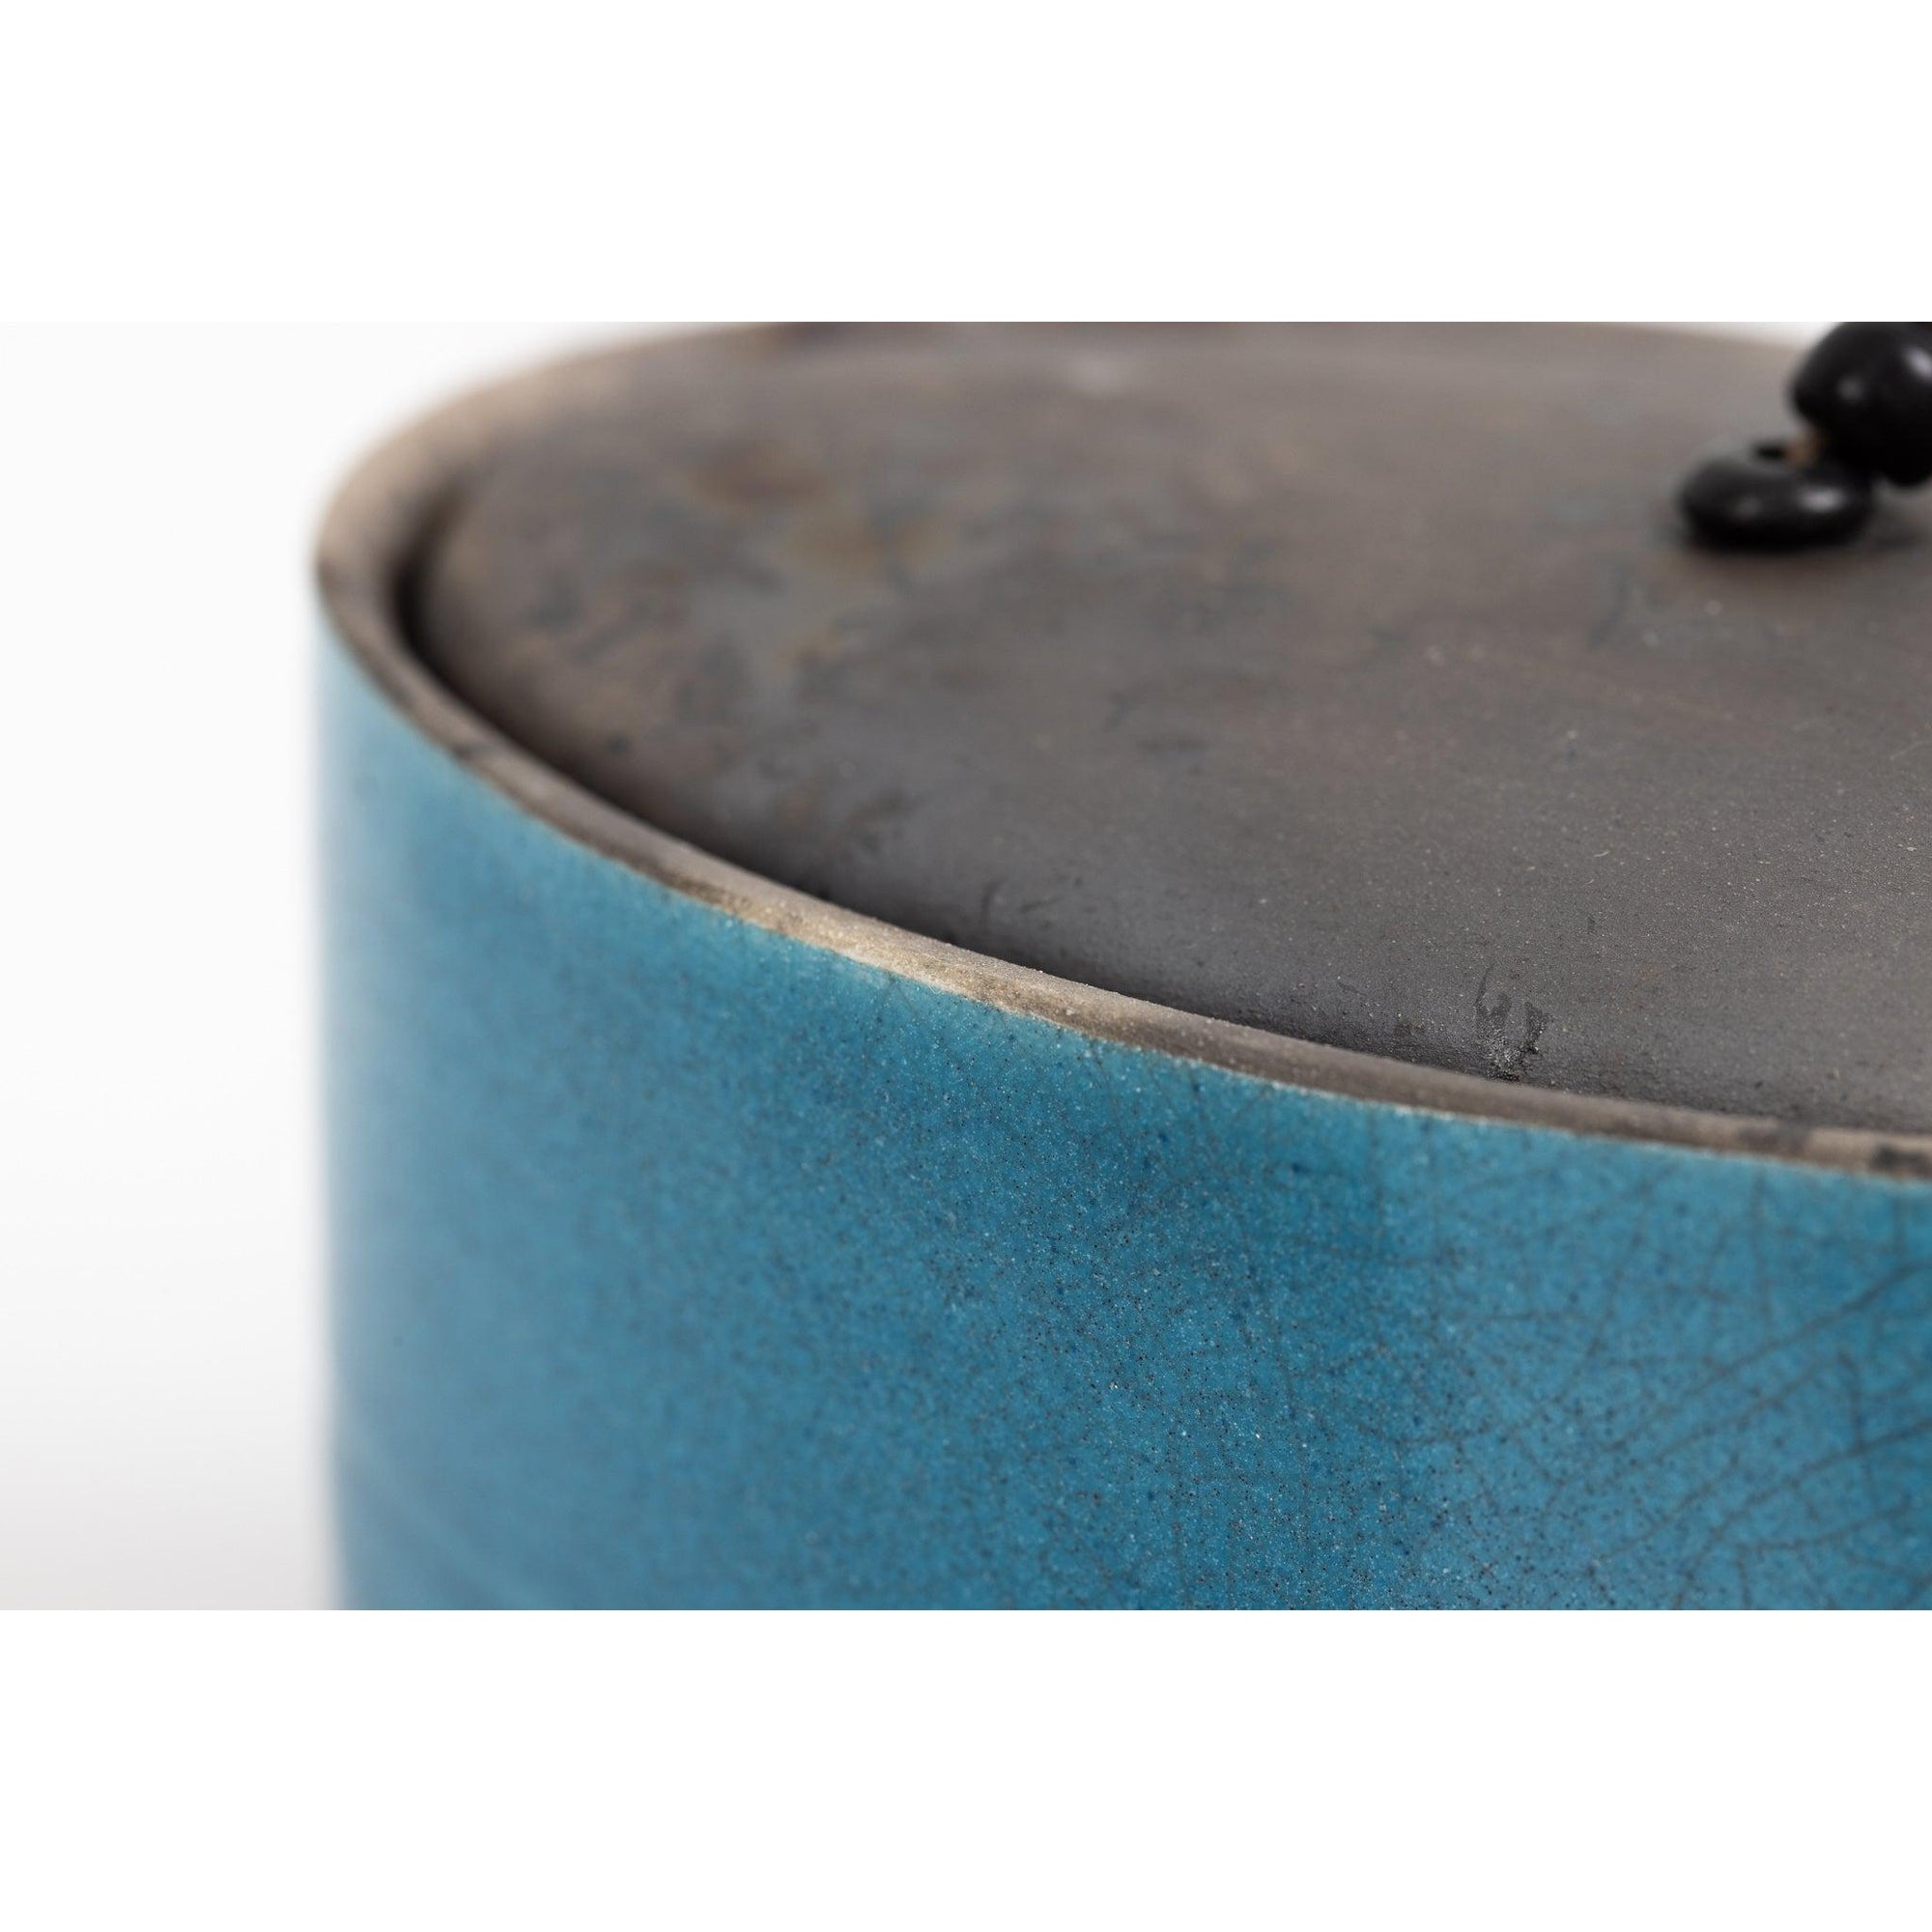 KSDD2 Ellipse, Raku Oval Container by Kate Schuricht, available at Padstow Gallery, Cornwall